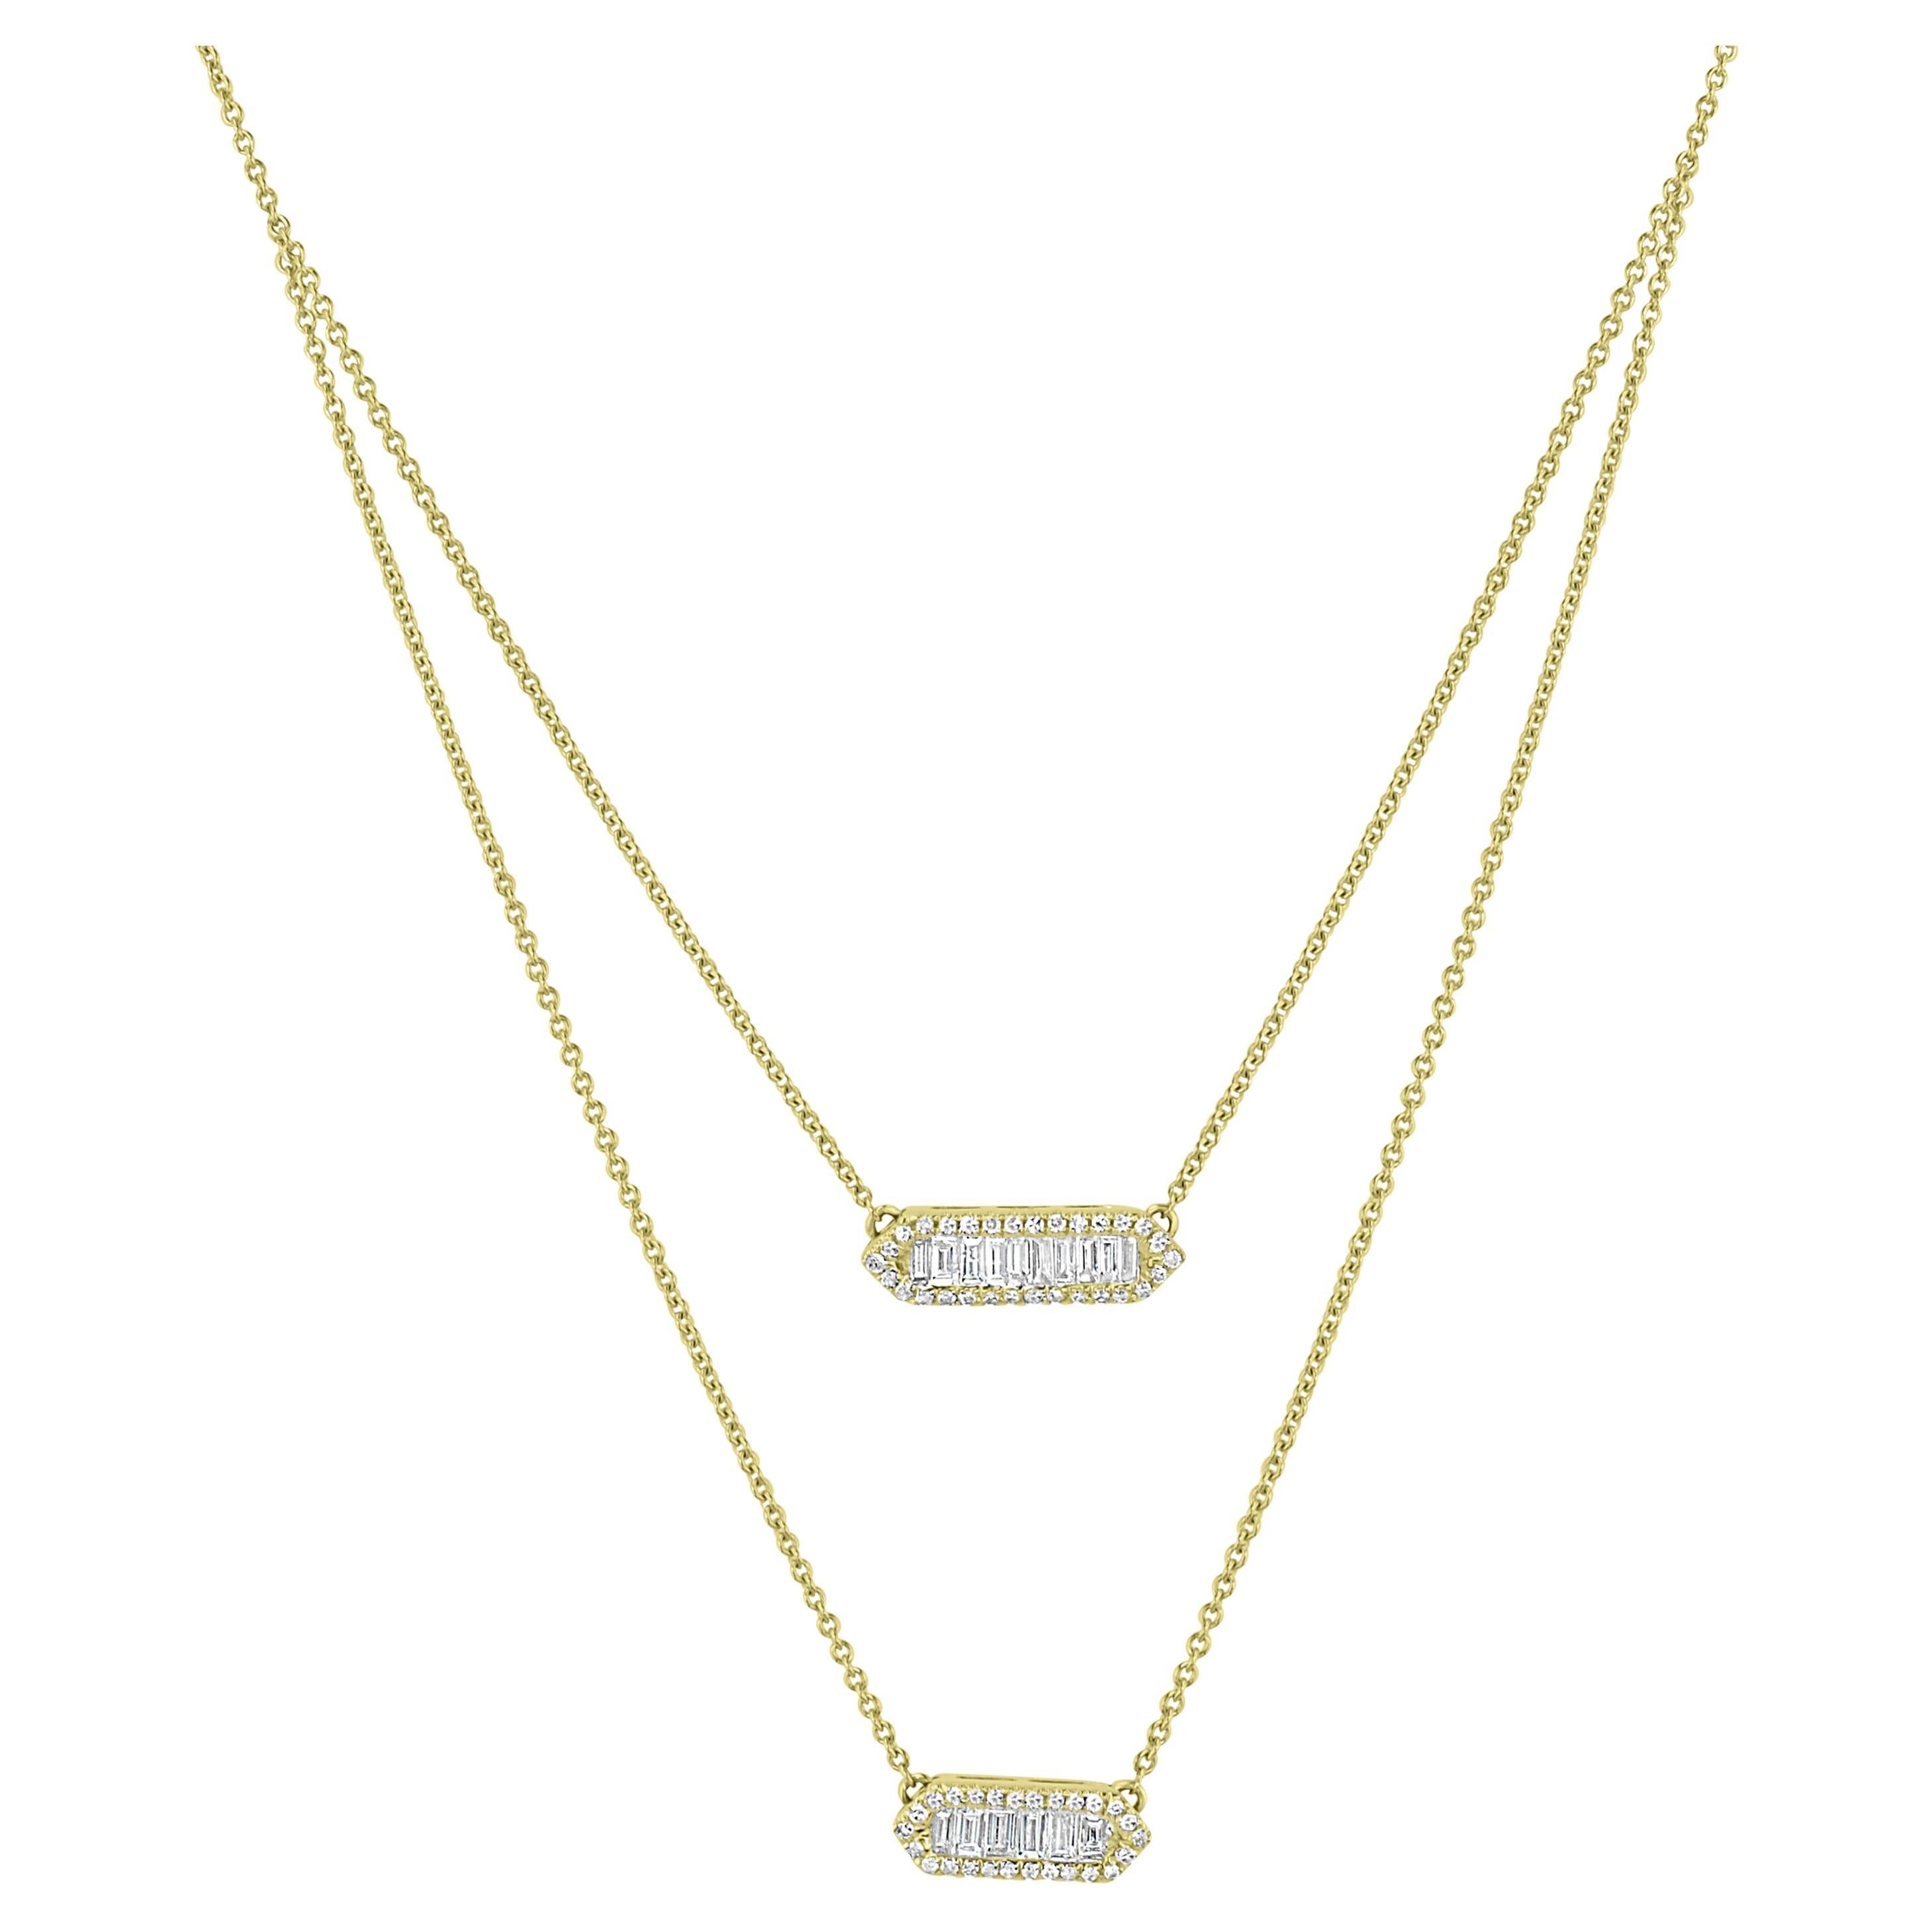 Luxle 0.62 Cttw. Diamond Double Strand Necklace in 14k Yellow Gold